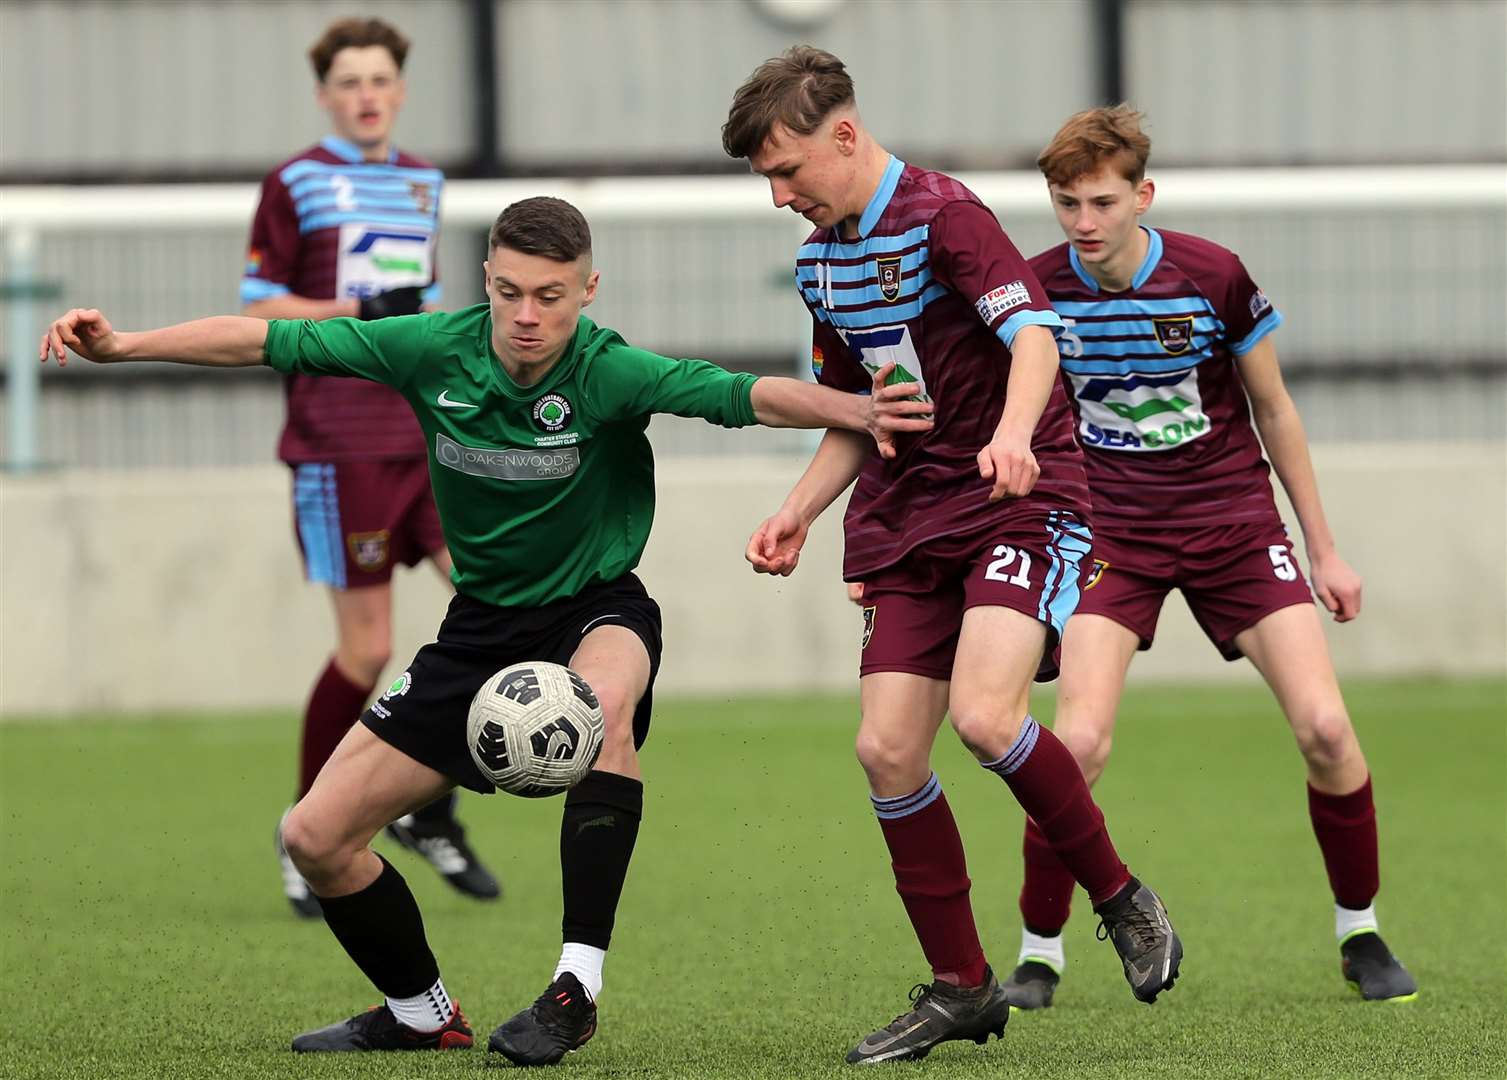 Vinters Rangers under-15s (green) hold off Wigmore Youth under-15s. Picture: PSP Images